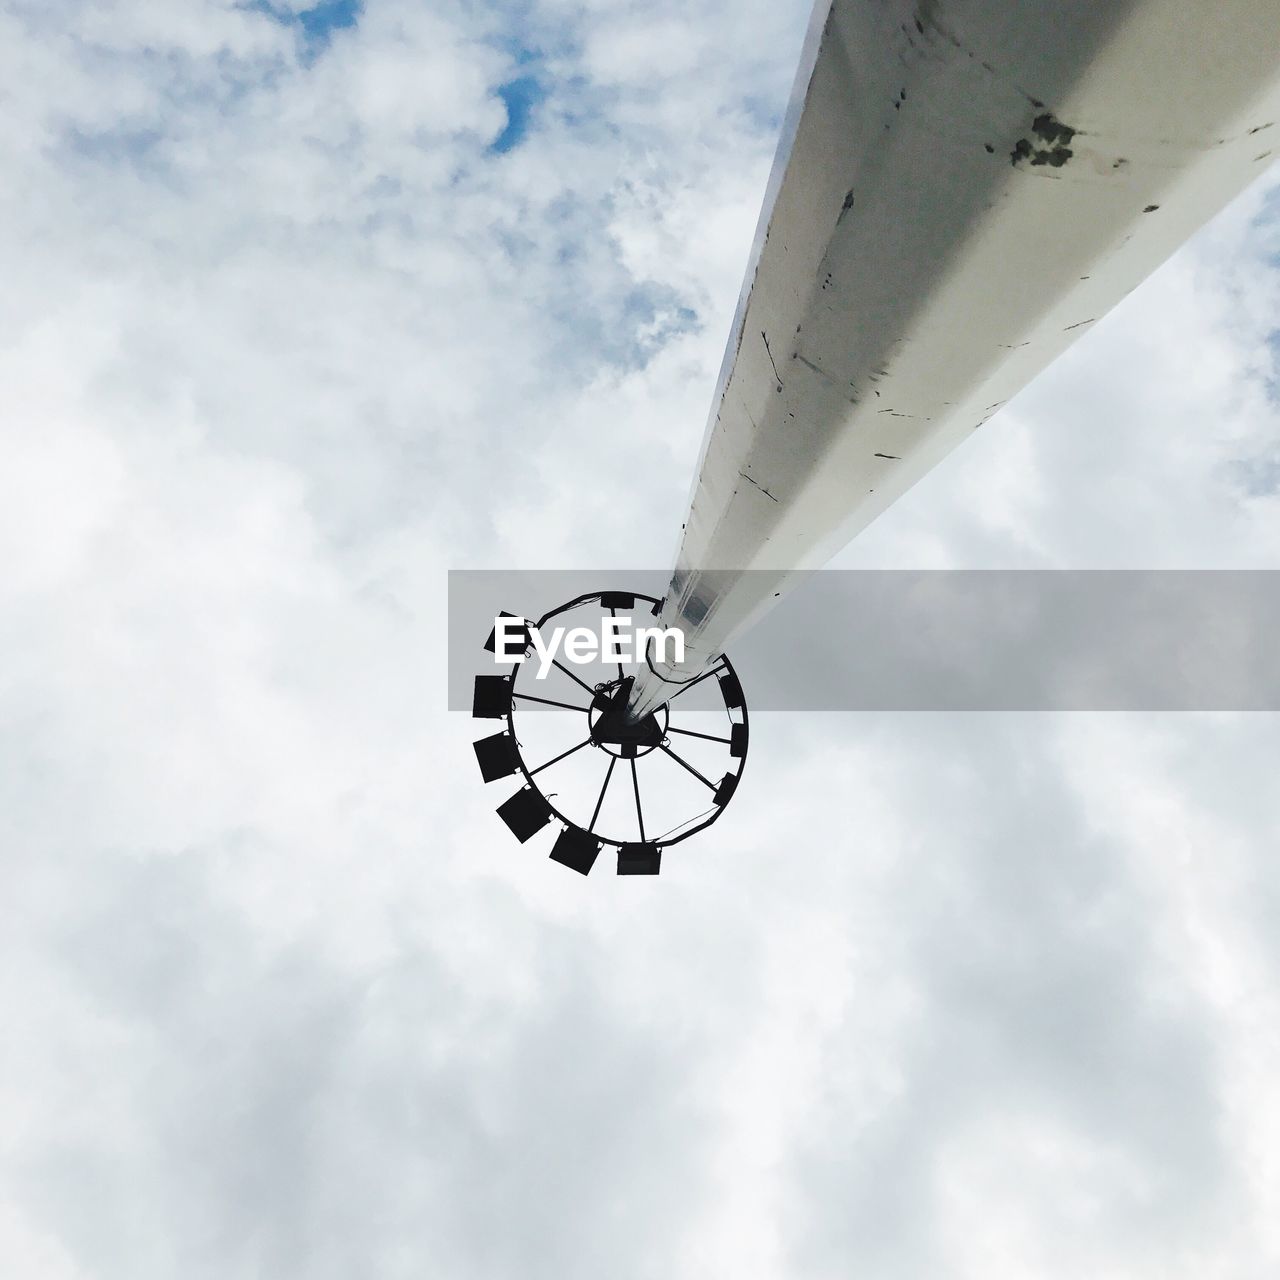 LOW ANGLE VIEW OF AIRPLANE AGAINST CLOUDY SKY